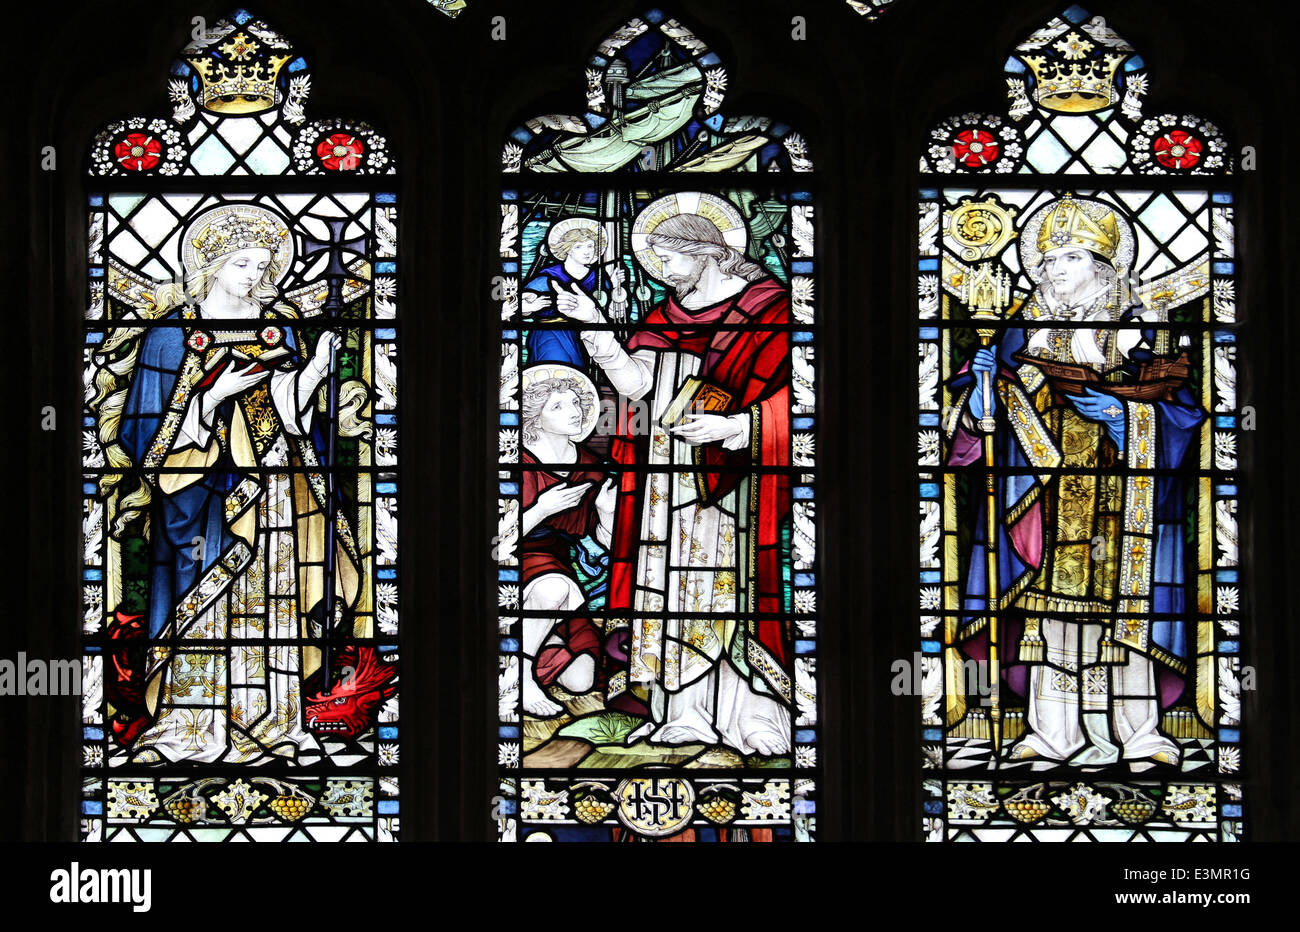 Stained Glass Window In St Margaret's the Grade I listed Medieval parish church of Cley-next-the-Sea, Norfolk, UK Stock Photo